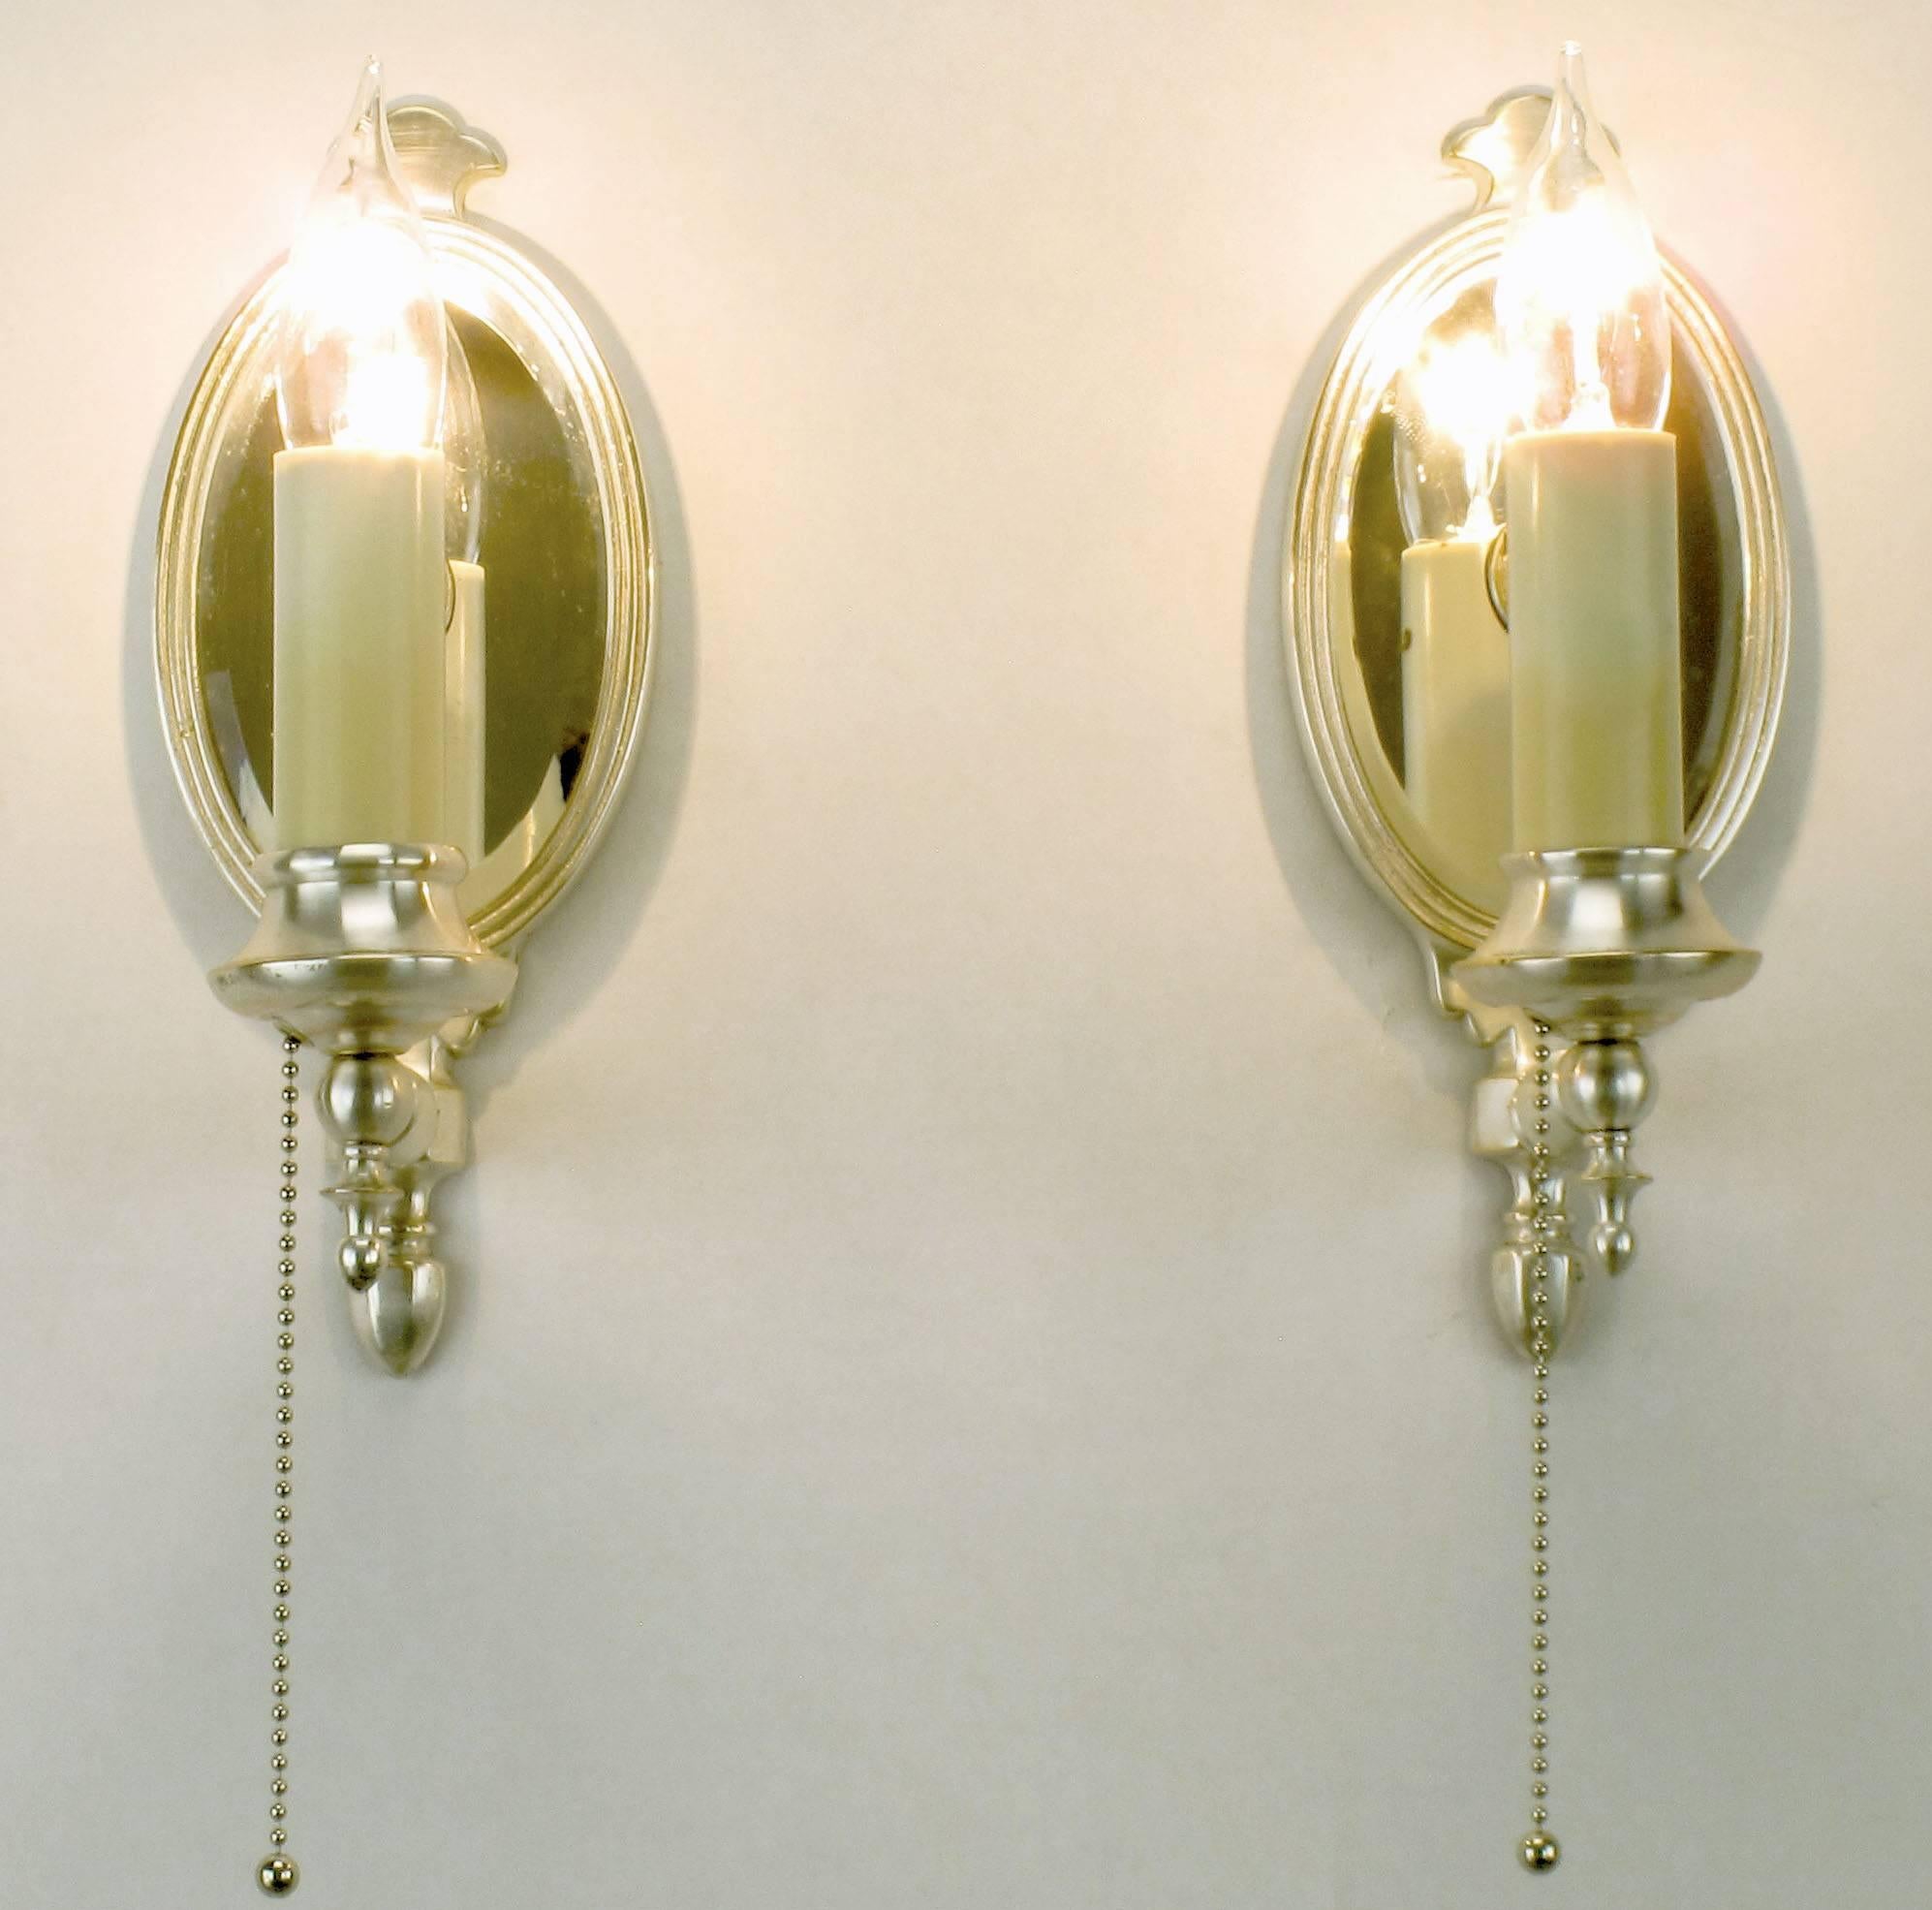 American Pairs of 1930s Silver Plated Sconces with Beveled Mirror Backs